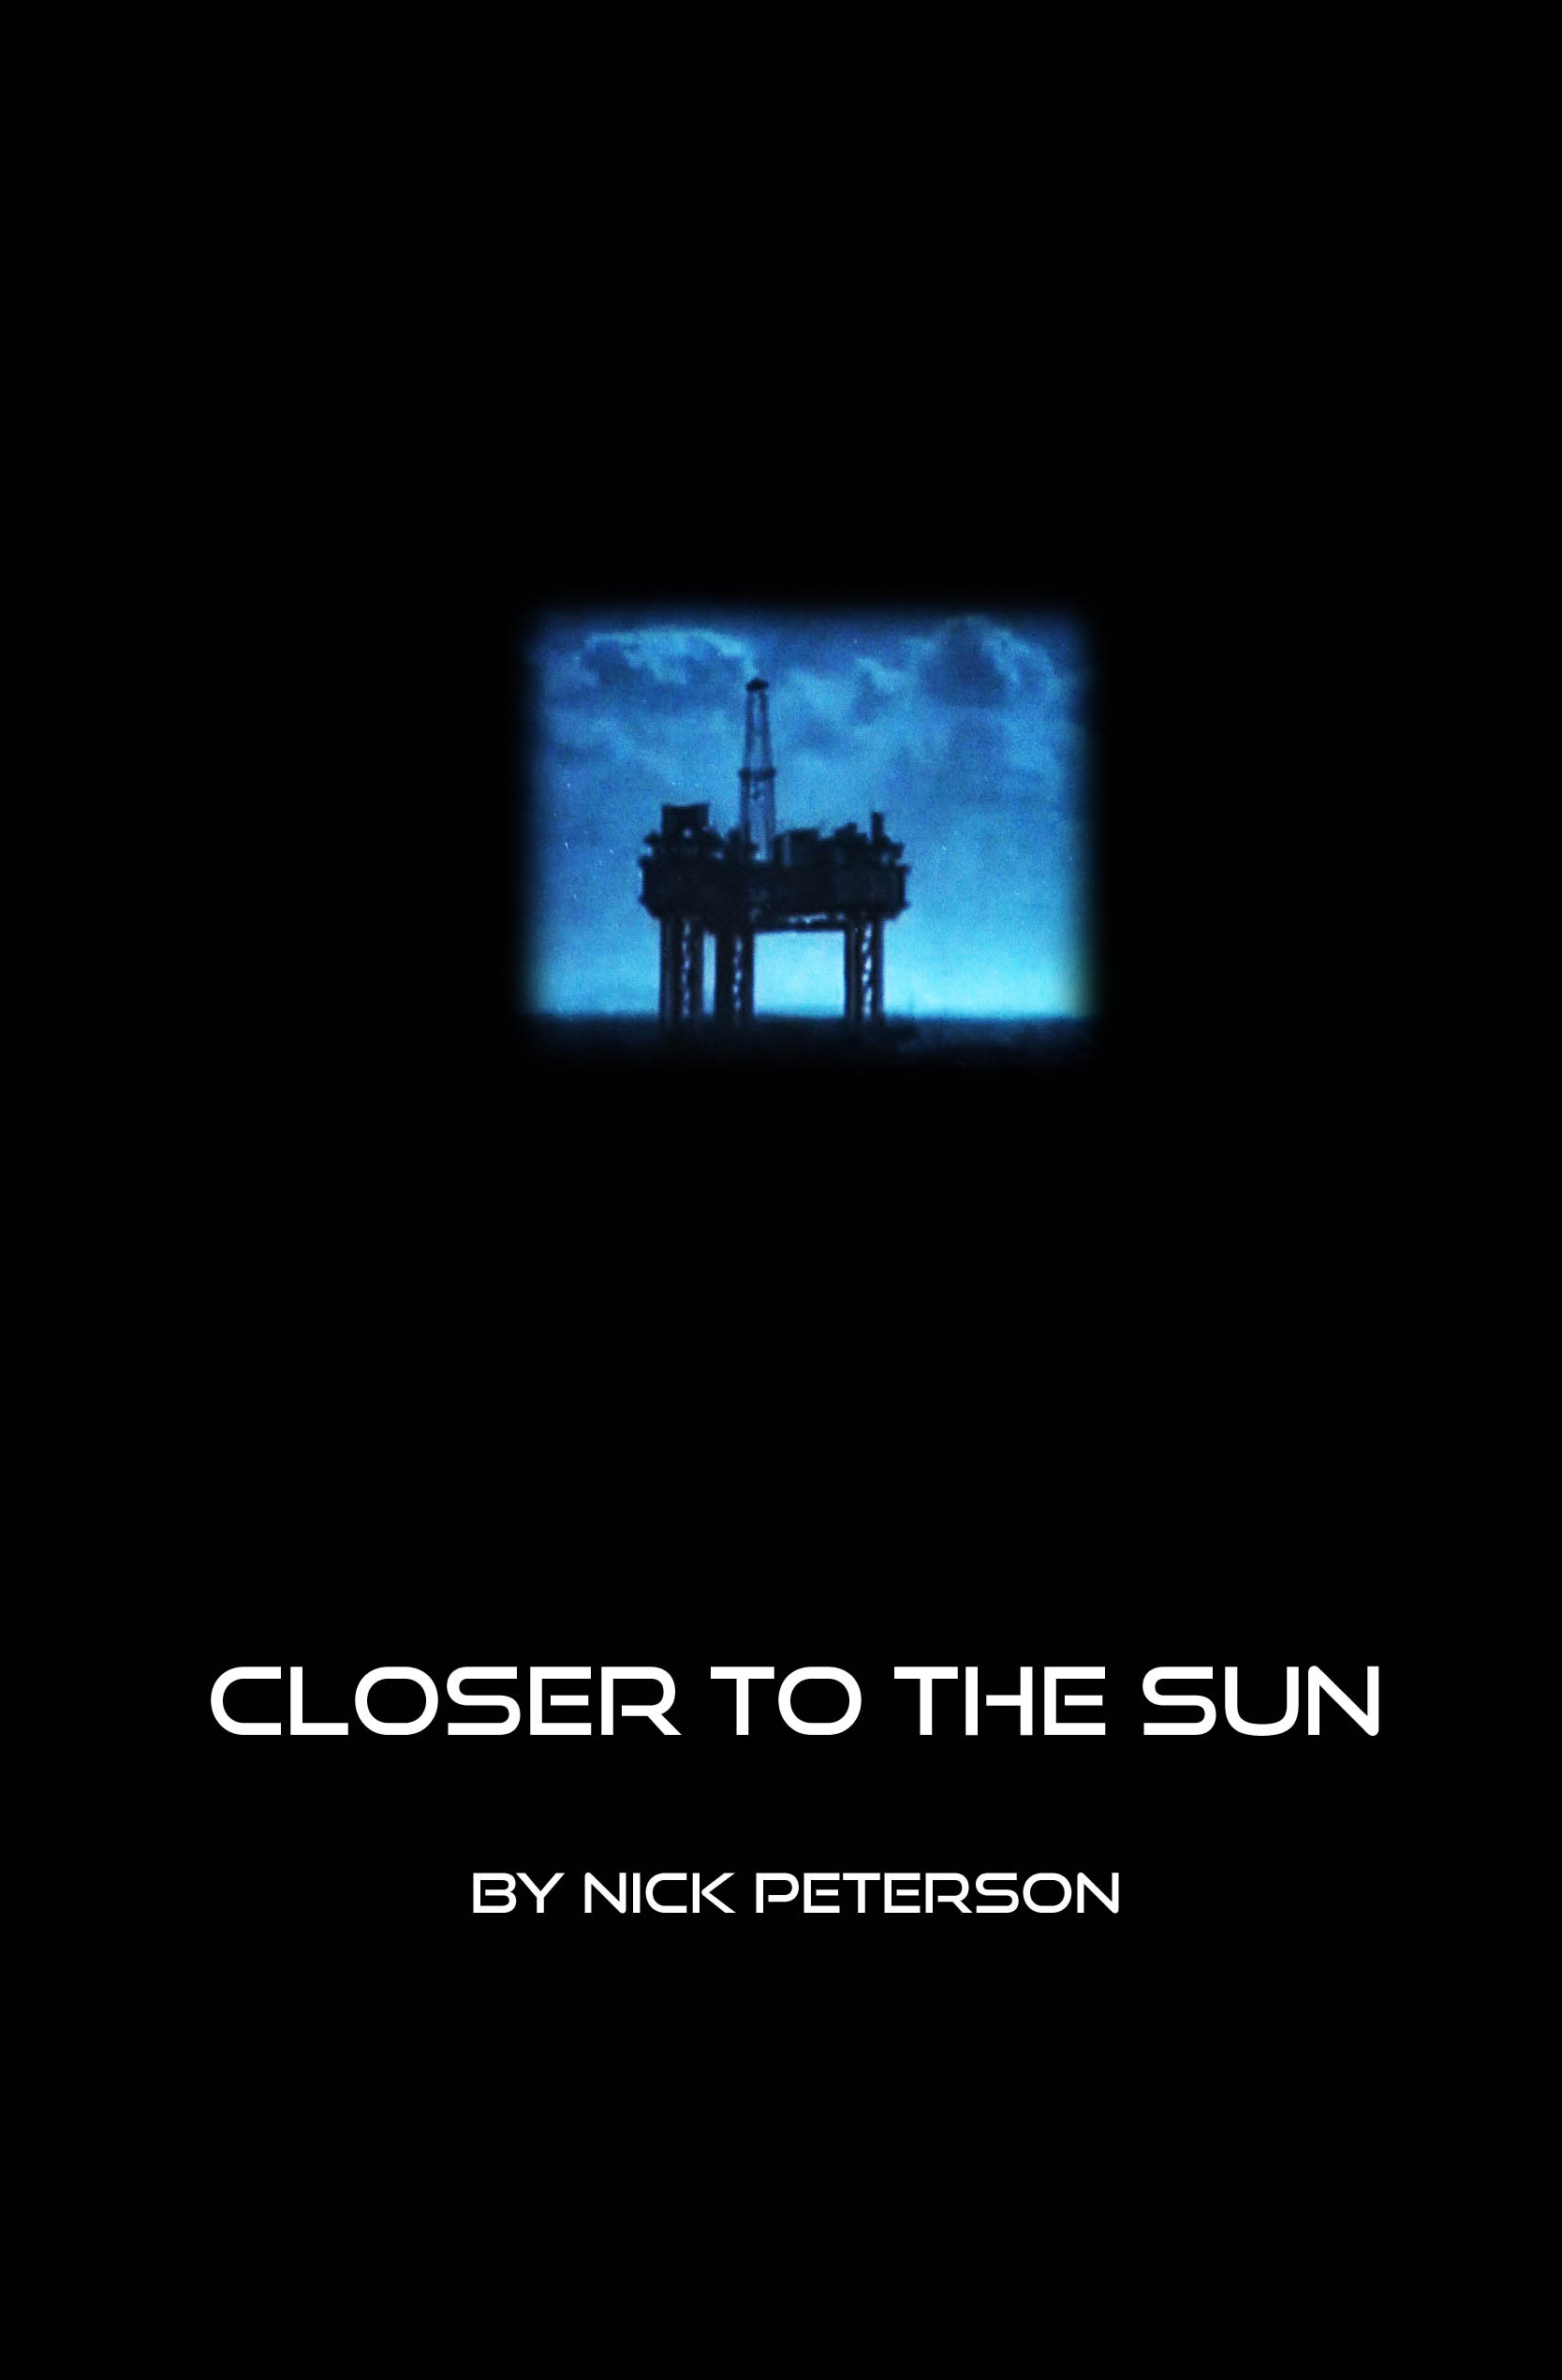 Closer to the Sun. Cover of the thriller book project by Nick Peterson. 2014.